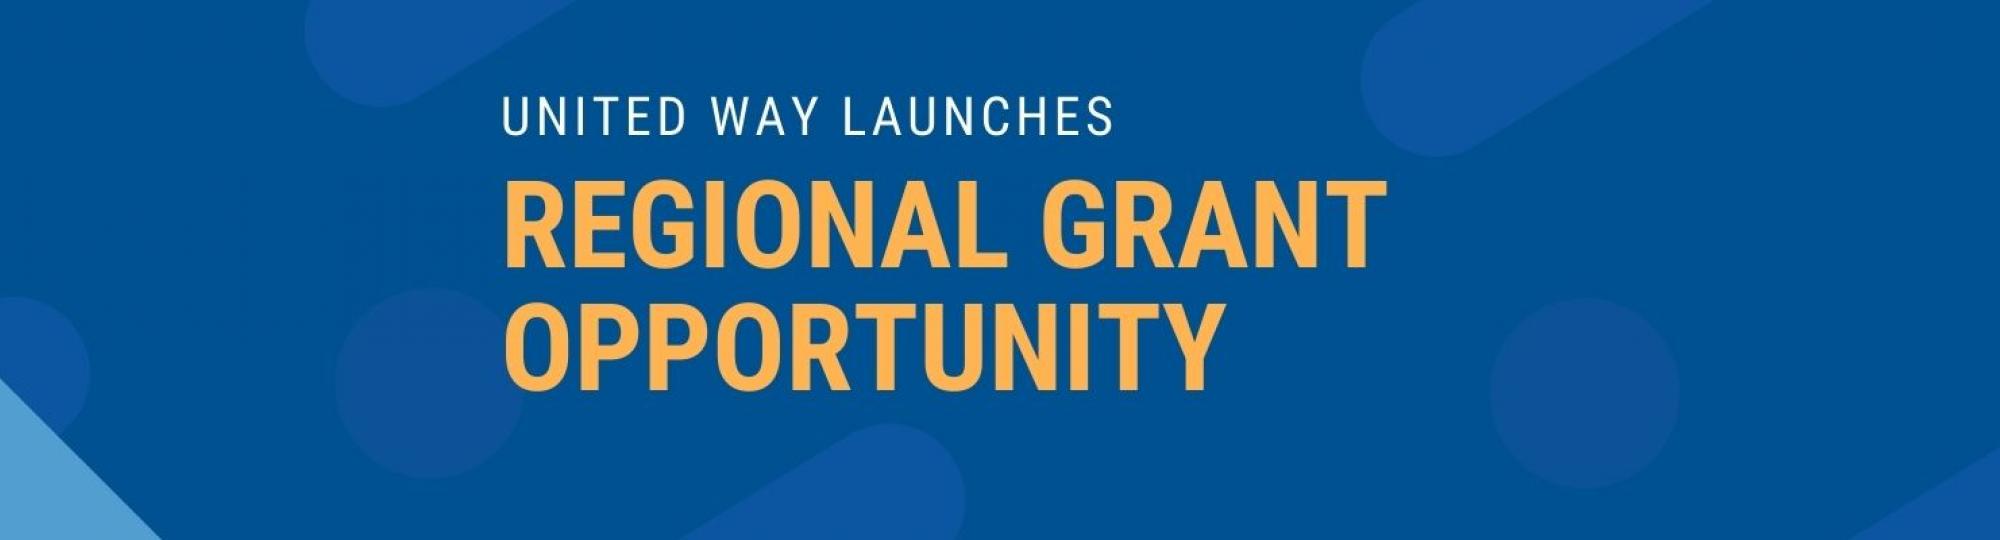 United Way of Western Connecticut Launches Regional Grant Opportunity